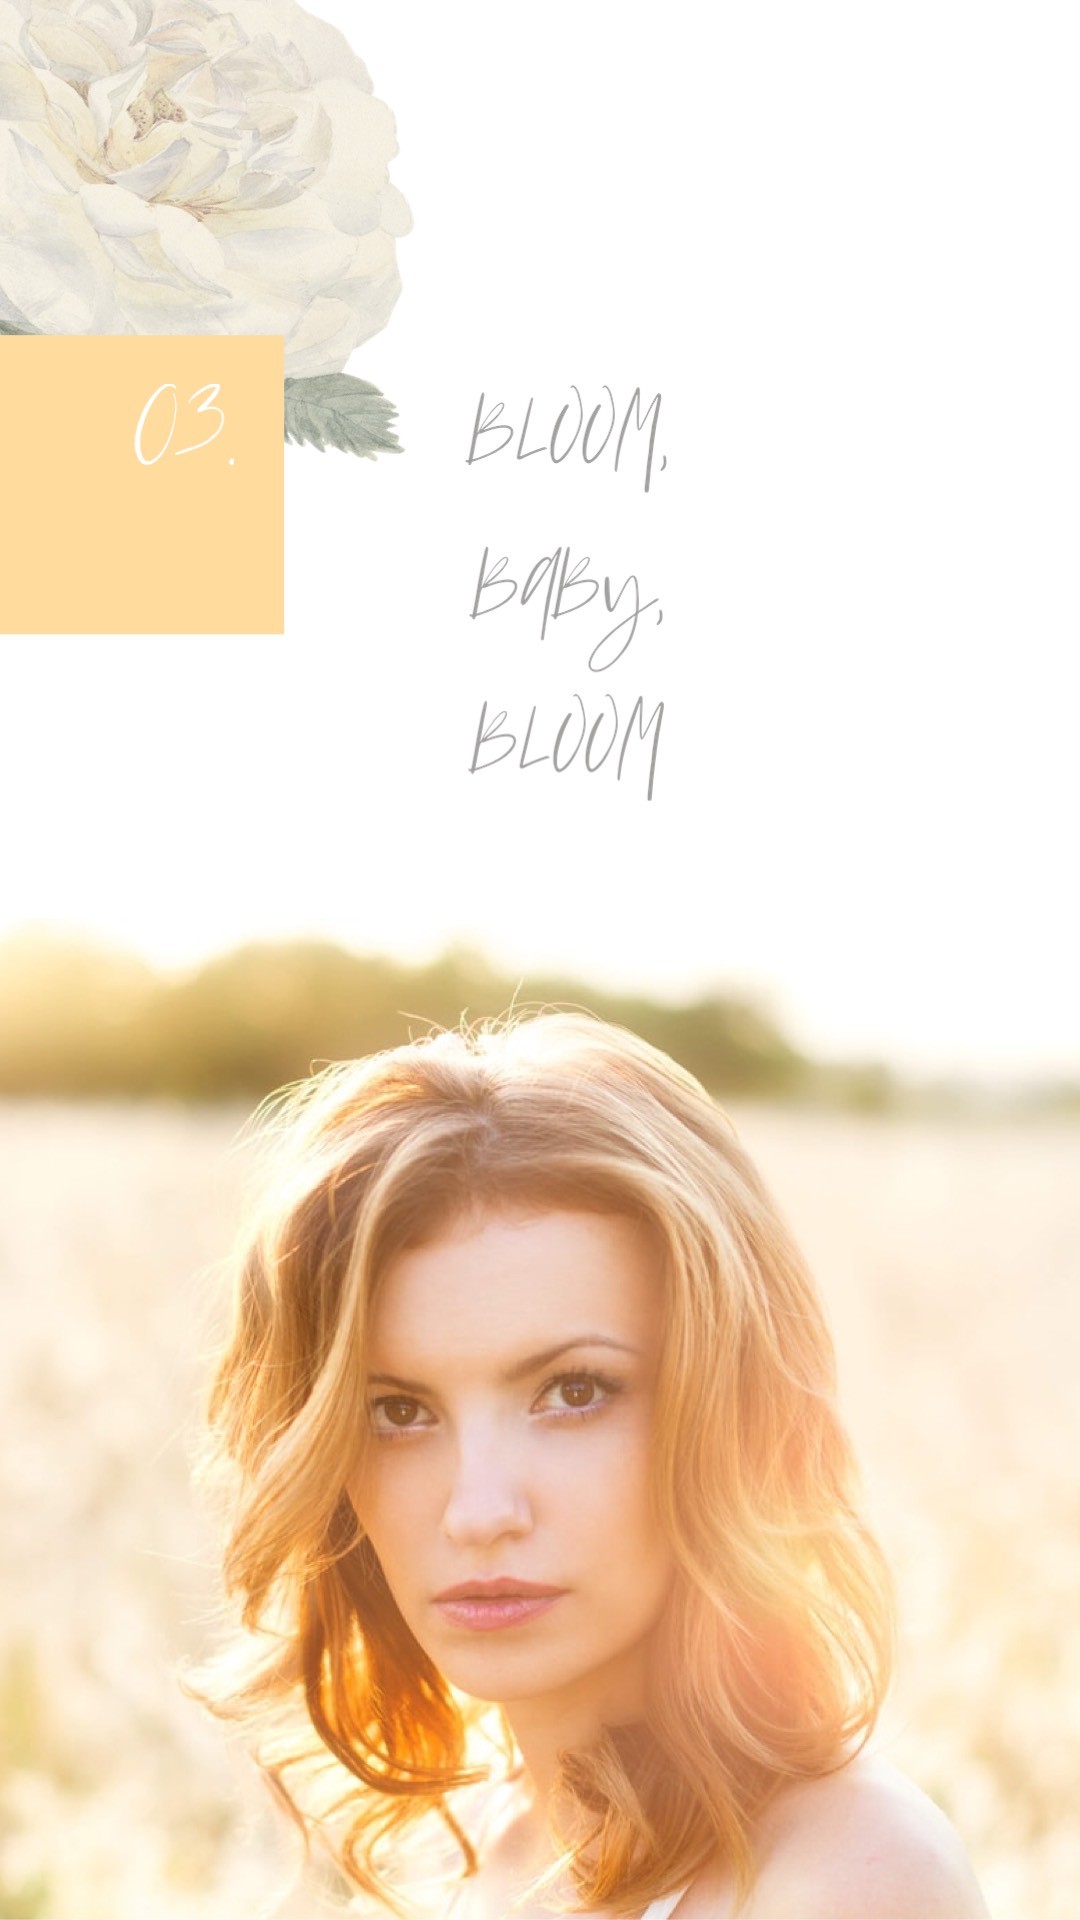 A Woman Standing In A Field With A Flower Spring Story Template